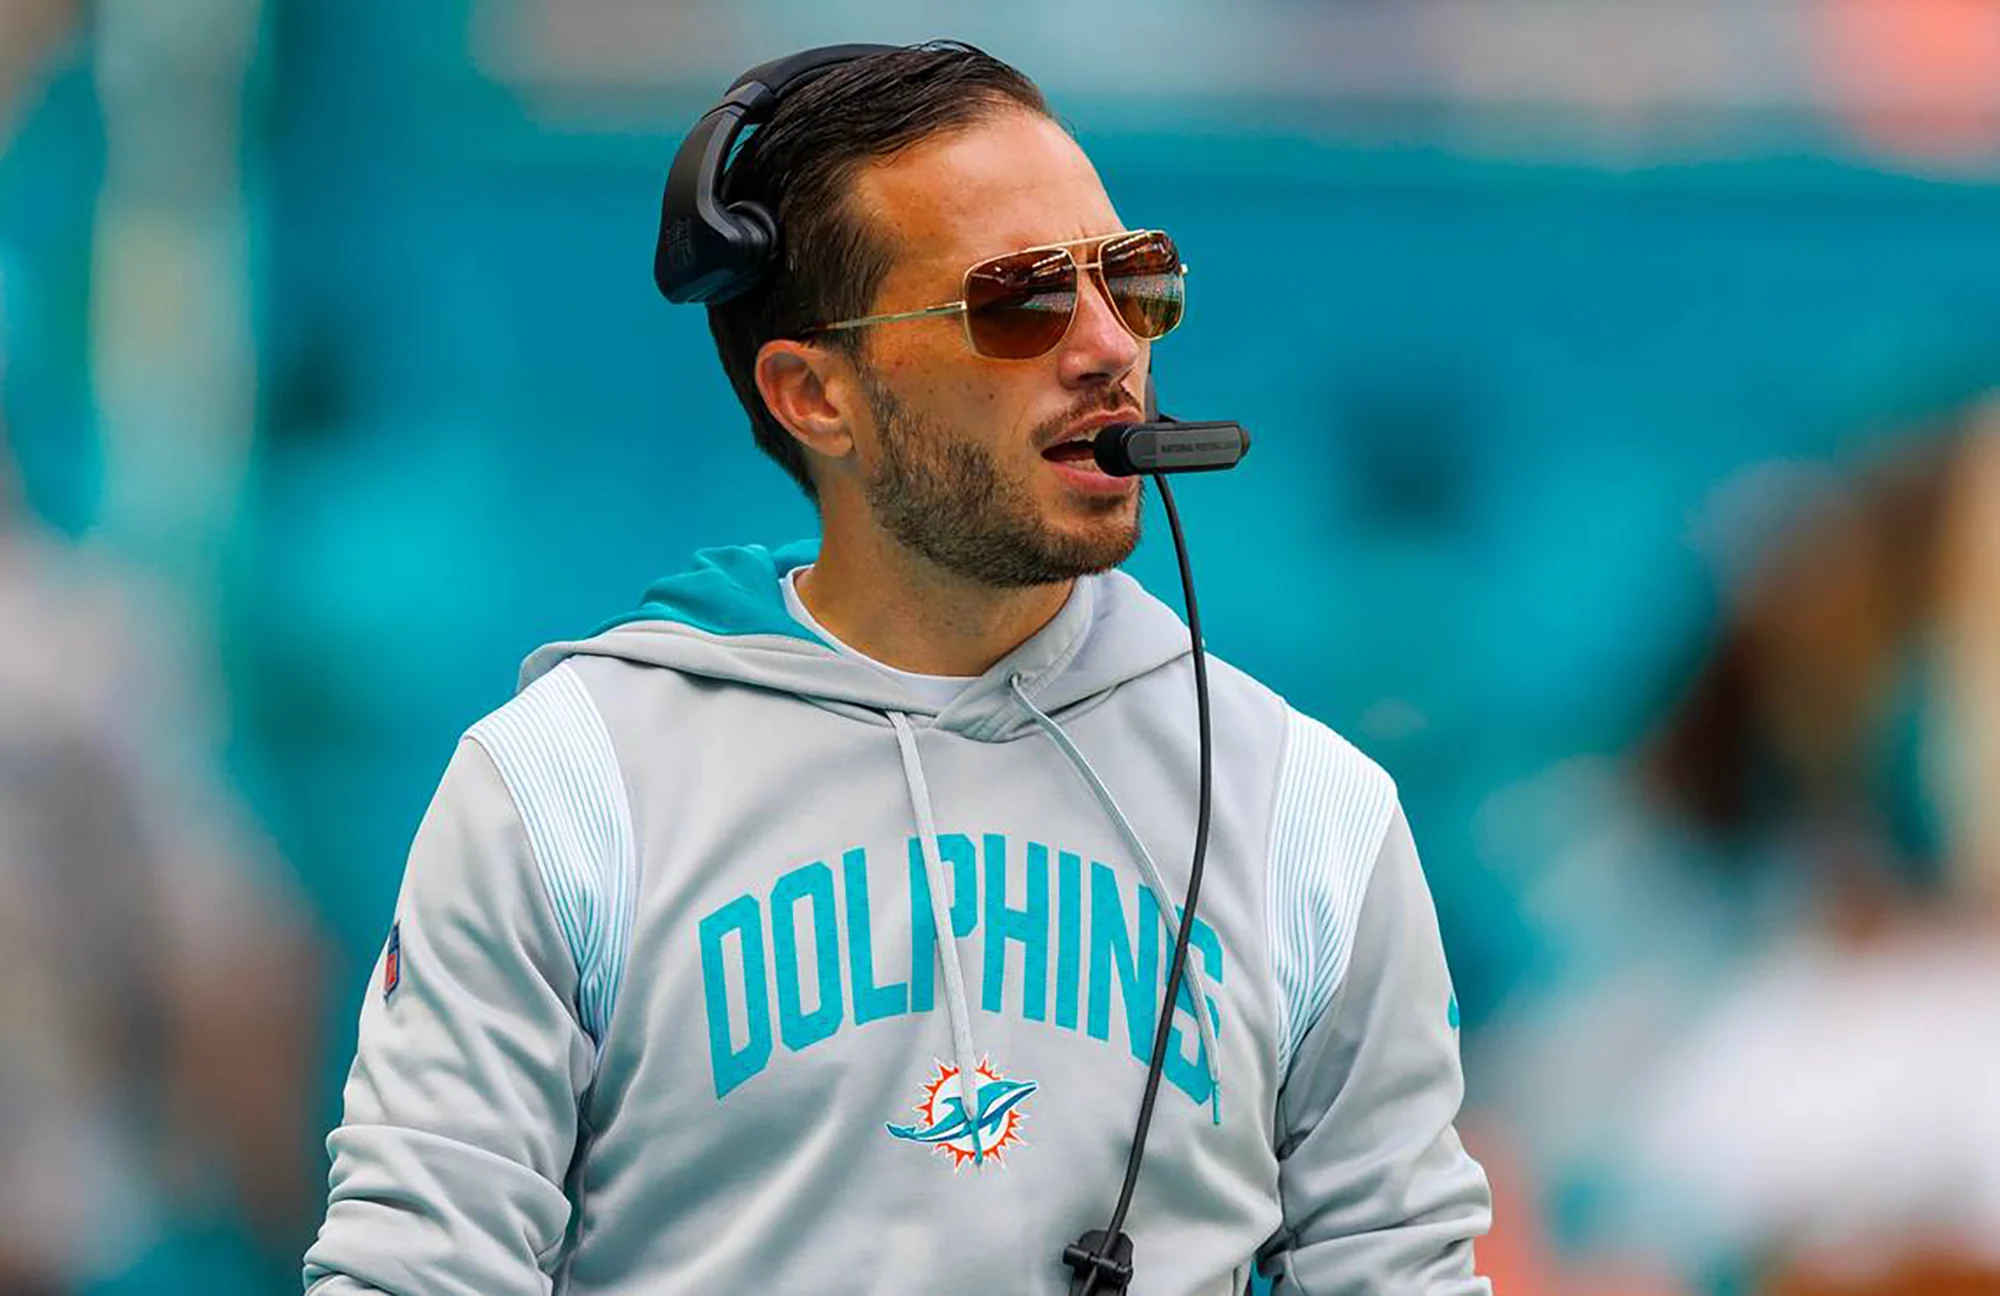 Dolphins Head Coach Mike McDaniel Serves a Vicious Comeback to the Jets Fans Who Were Making Fun of Him During the “Black Friday” Game (VIDEO)